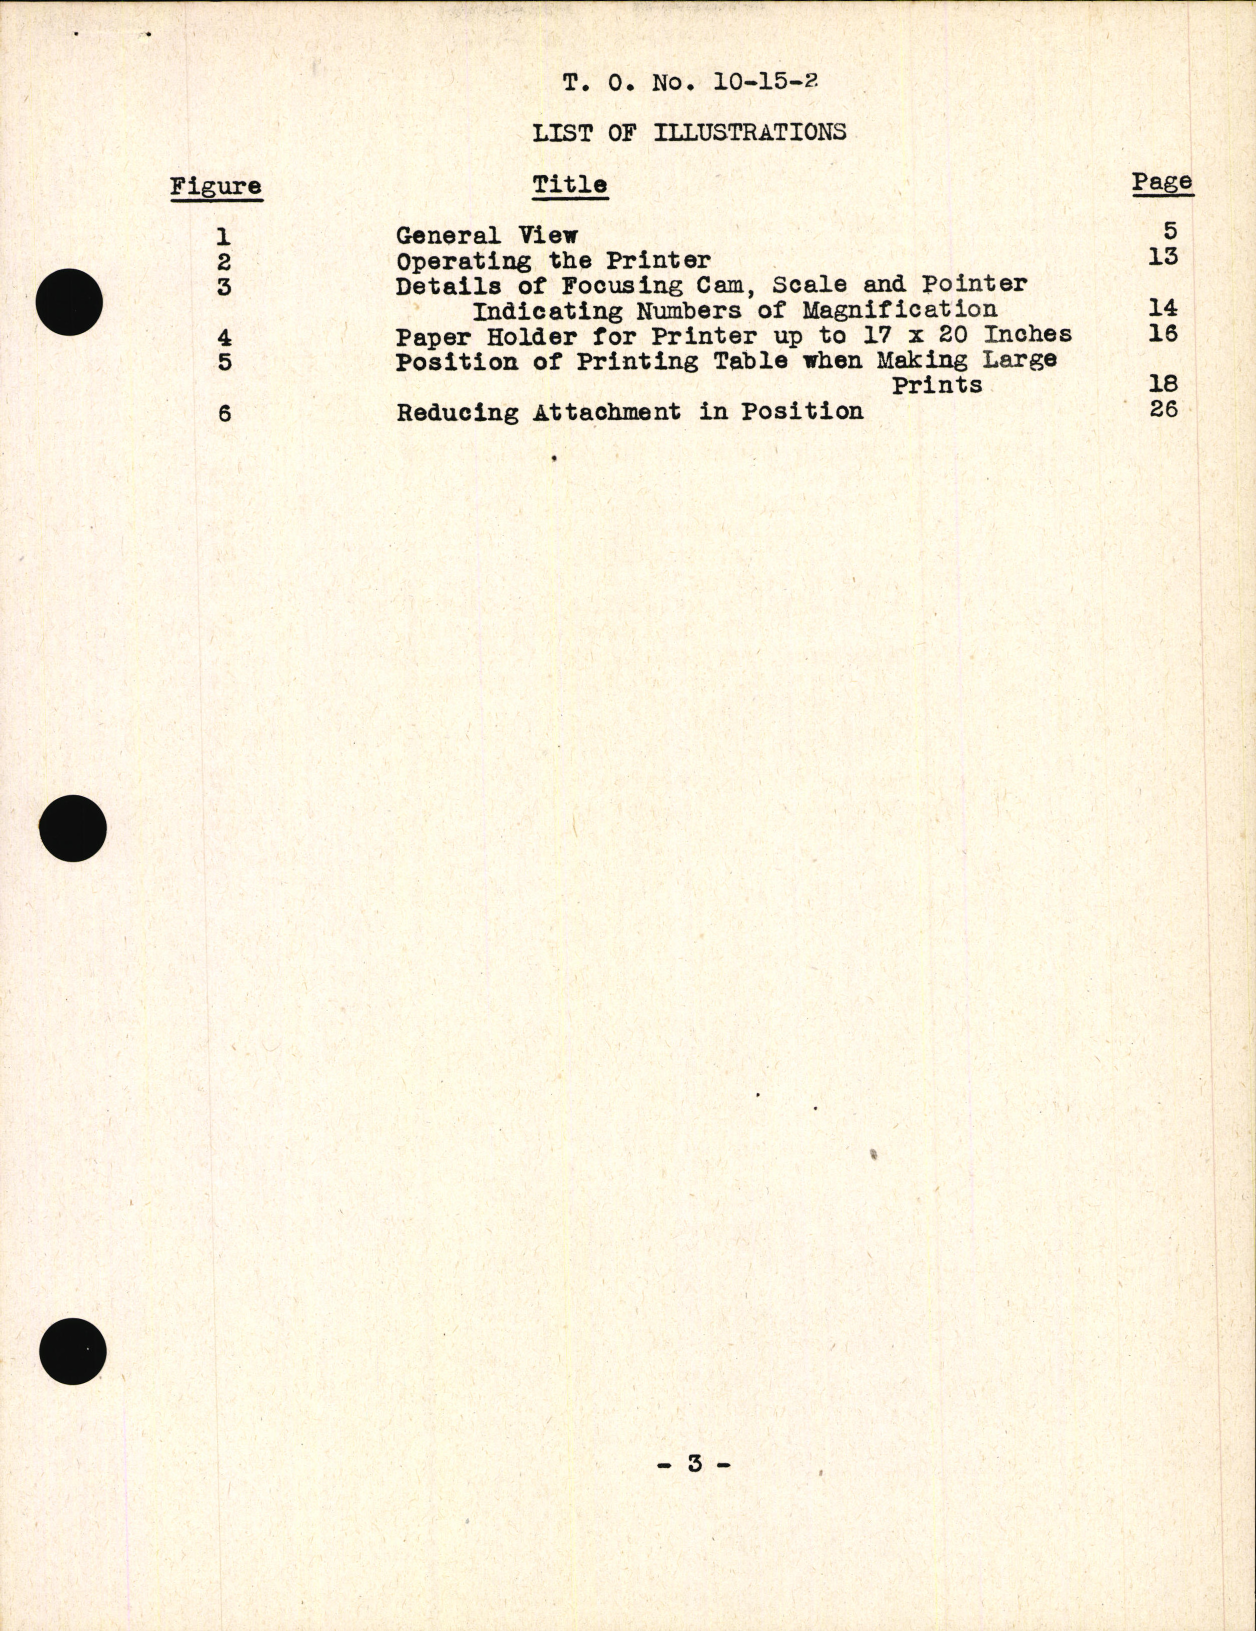 Sample page 5 from AirCorps Library document: Handbook of Instructions for Type B-1 Projection Printer